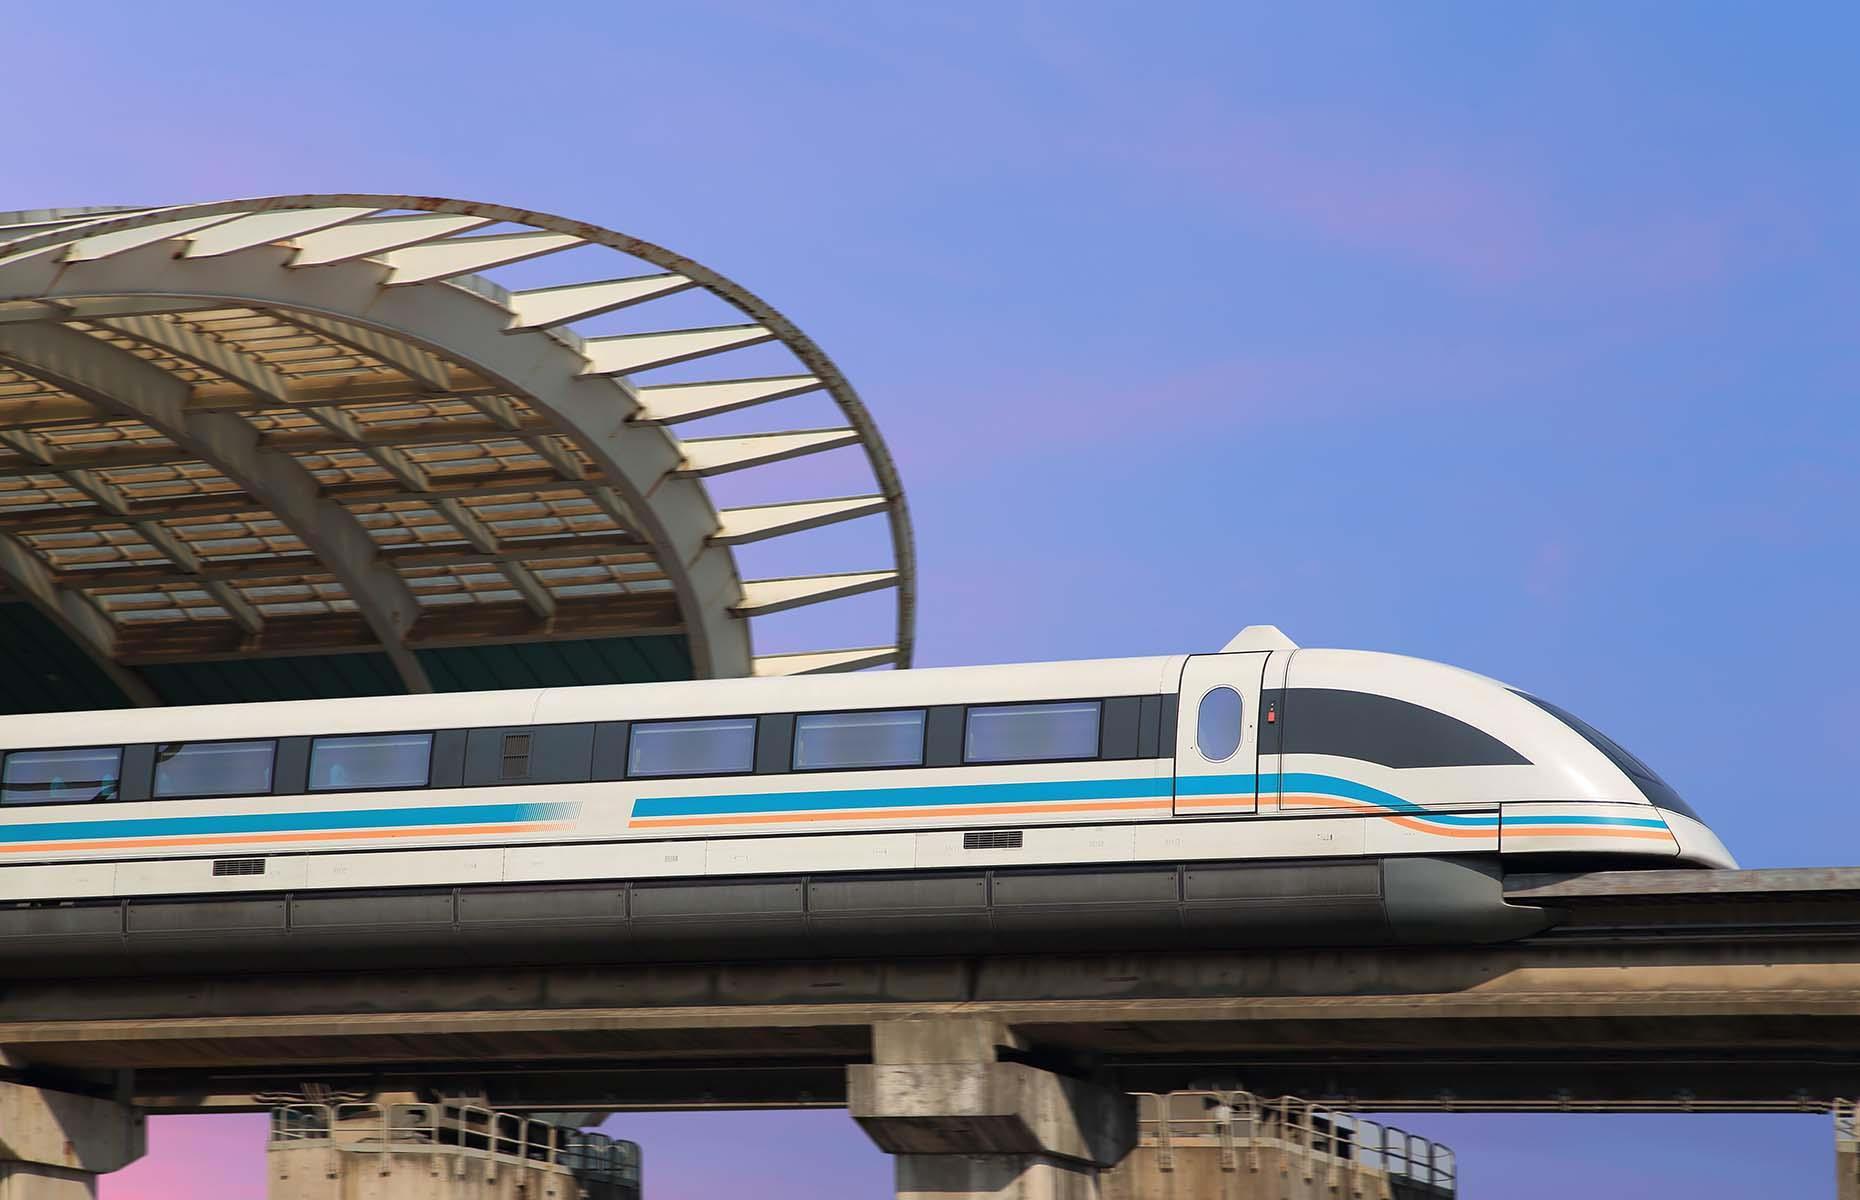 <p>Traveling at a mind-boggling speed, Shanghai's maglev (magnetic levitation) train is <a href="https://www.railway-technology.com/features/feature-top-ten-fastest-trains-in-the-world/">the fastest passenger train in the world</a>. With a spine-tingling operational speed of 267mph (430km/h), the train connects Shanghai Pudong International Airport with Longyang Road Station in the outskirts of Pudong. <a href="https://www.chinahighlights.com/shanghai/transportation/maglev-train.htm">Traveling at an average speed of 143mph (230km/h), the 19-mile-long (30km) journey can be completed within eight minutes</a>.</p>